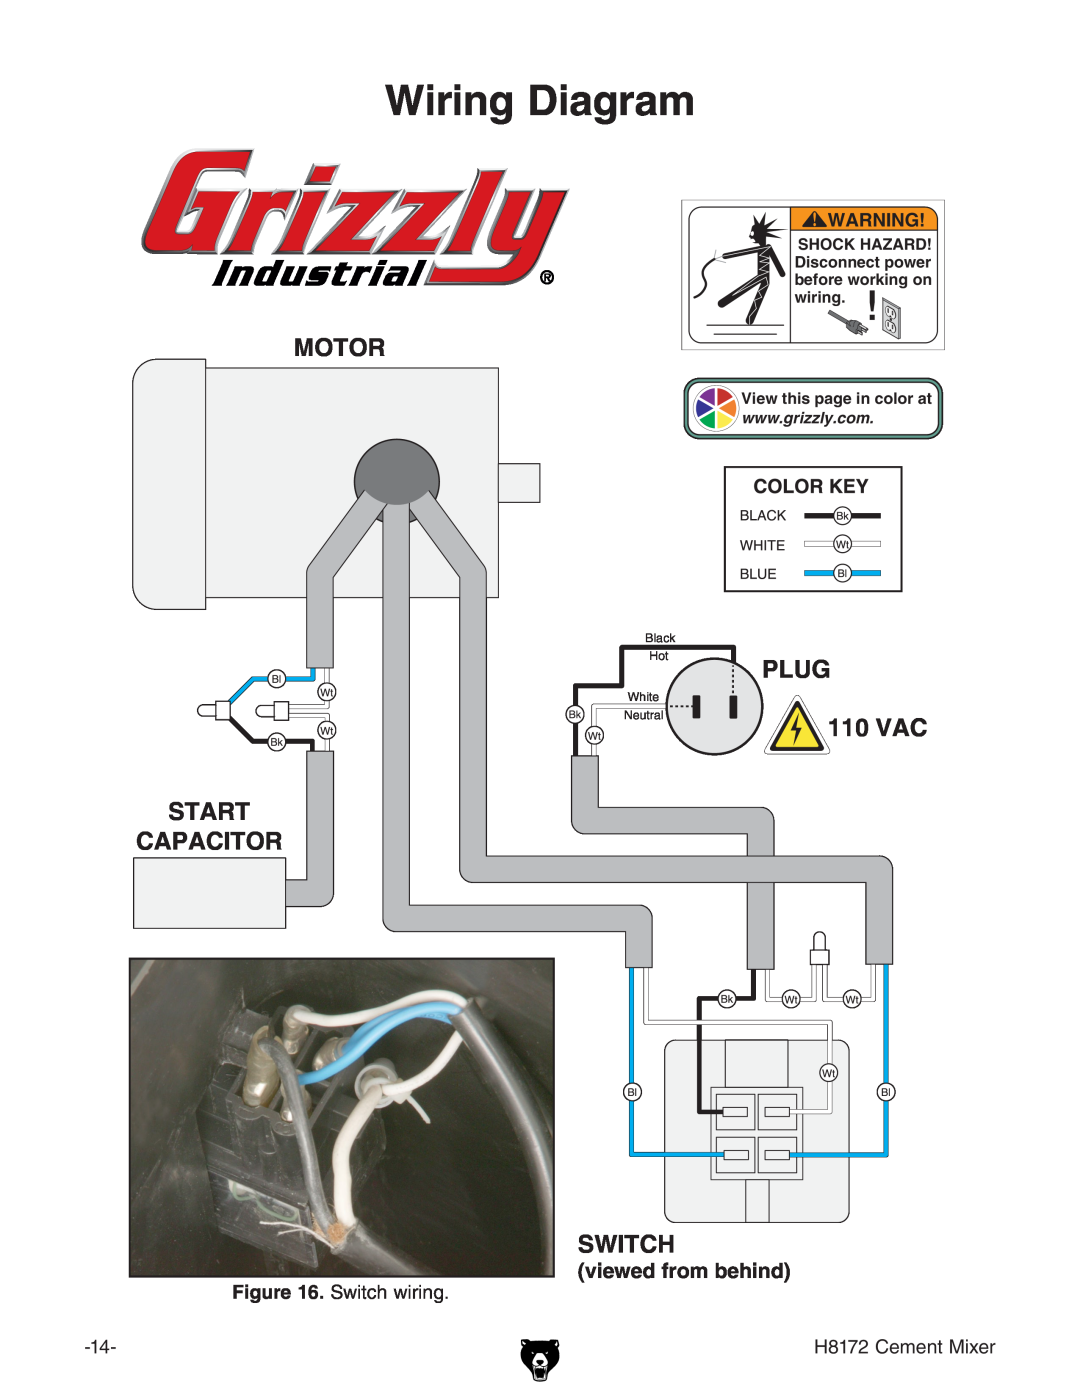 Grizzly owner manual Wiring Diagram, Switch wiring, H8172 Cement Mixer 